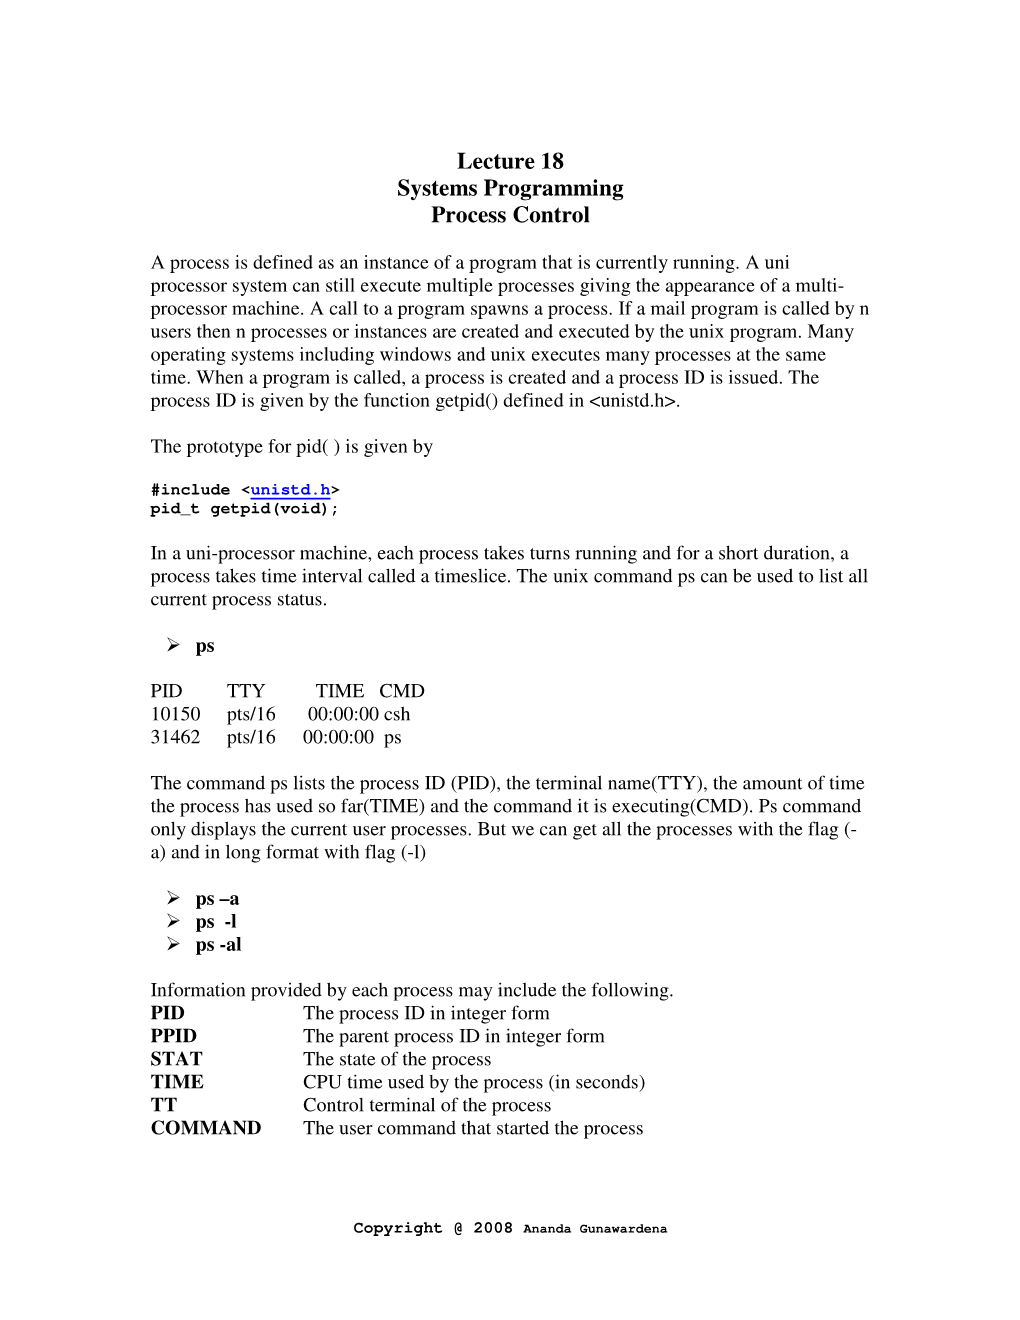 Lecture 18 Systems Programming Process Control